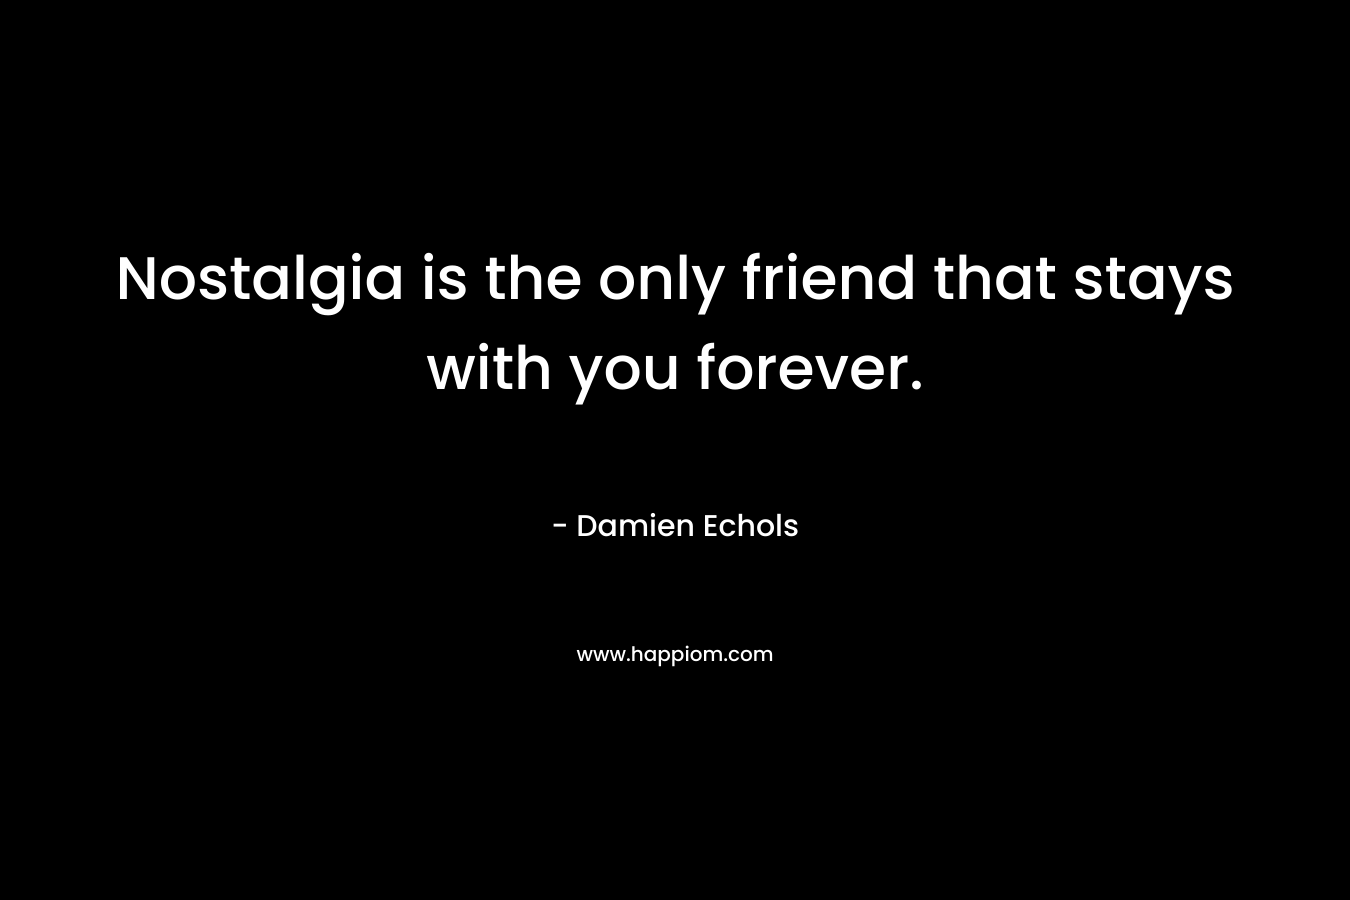 Nostalgia is the only friend that stays with you forever.